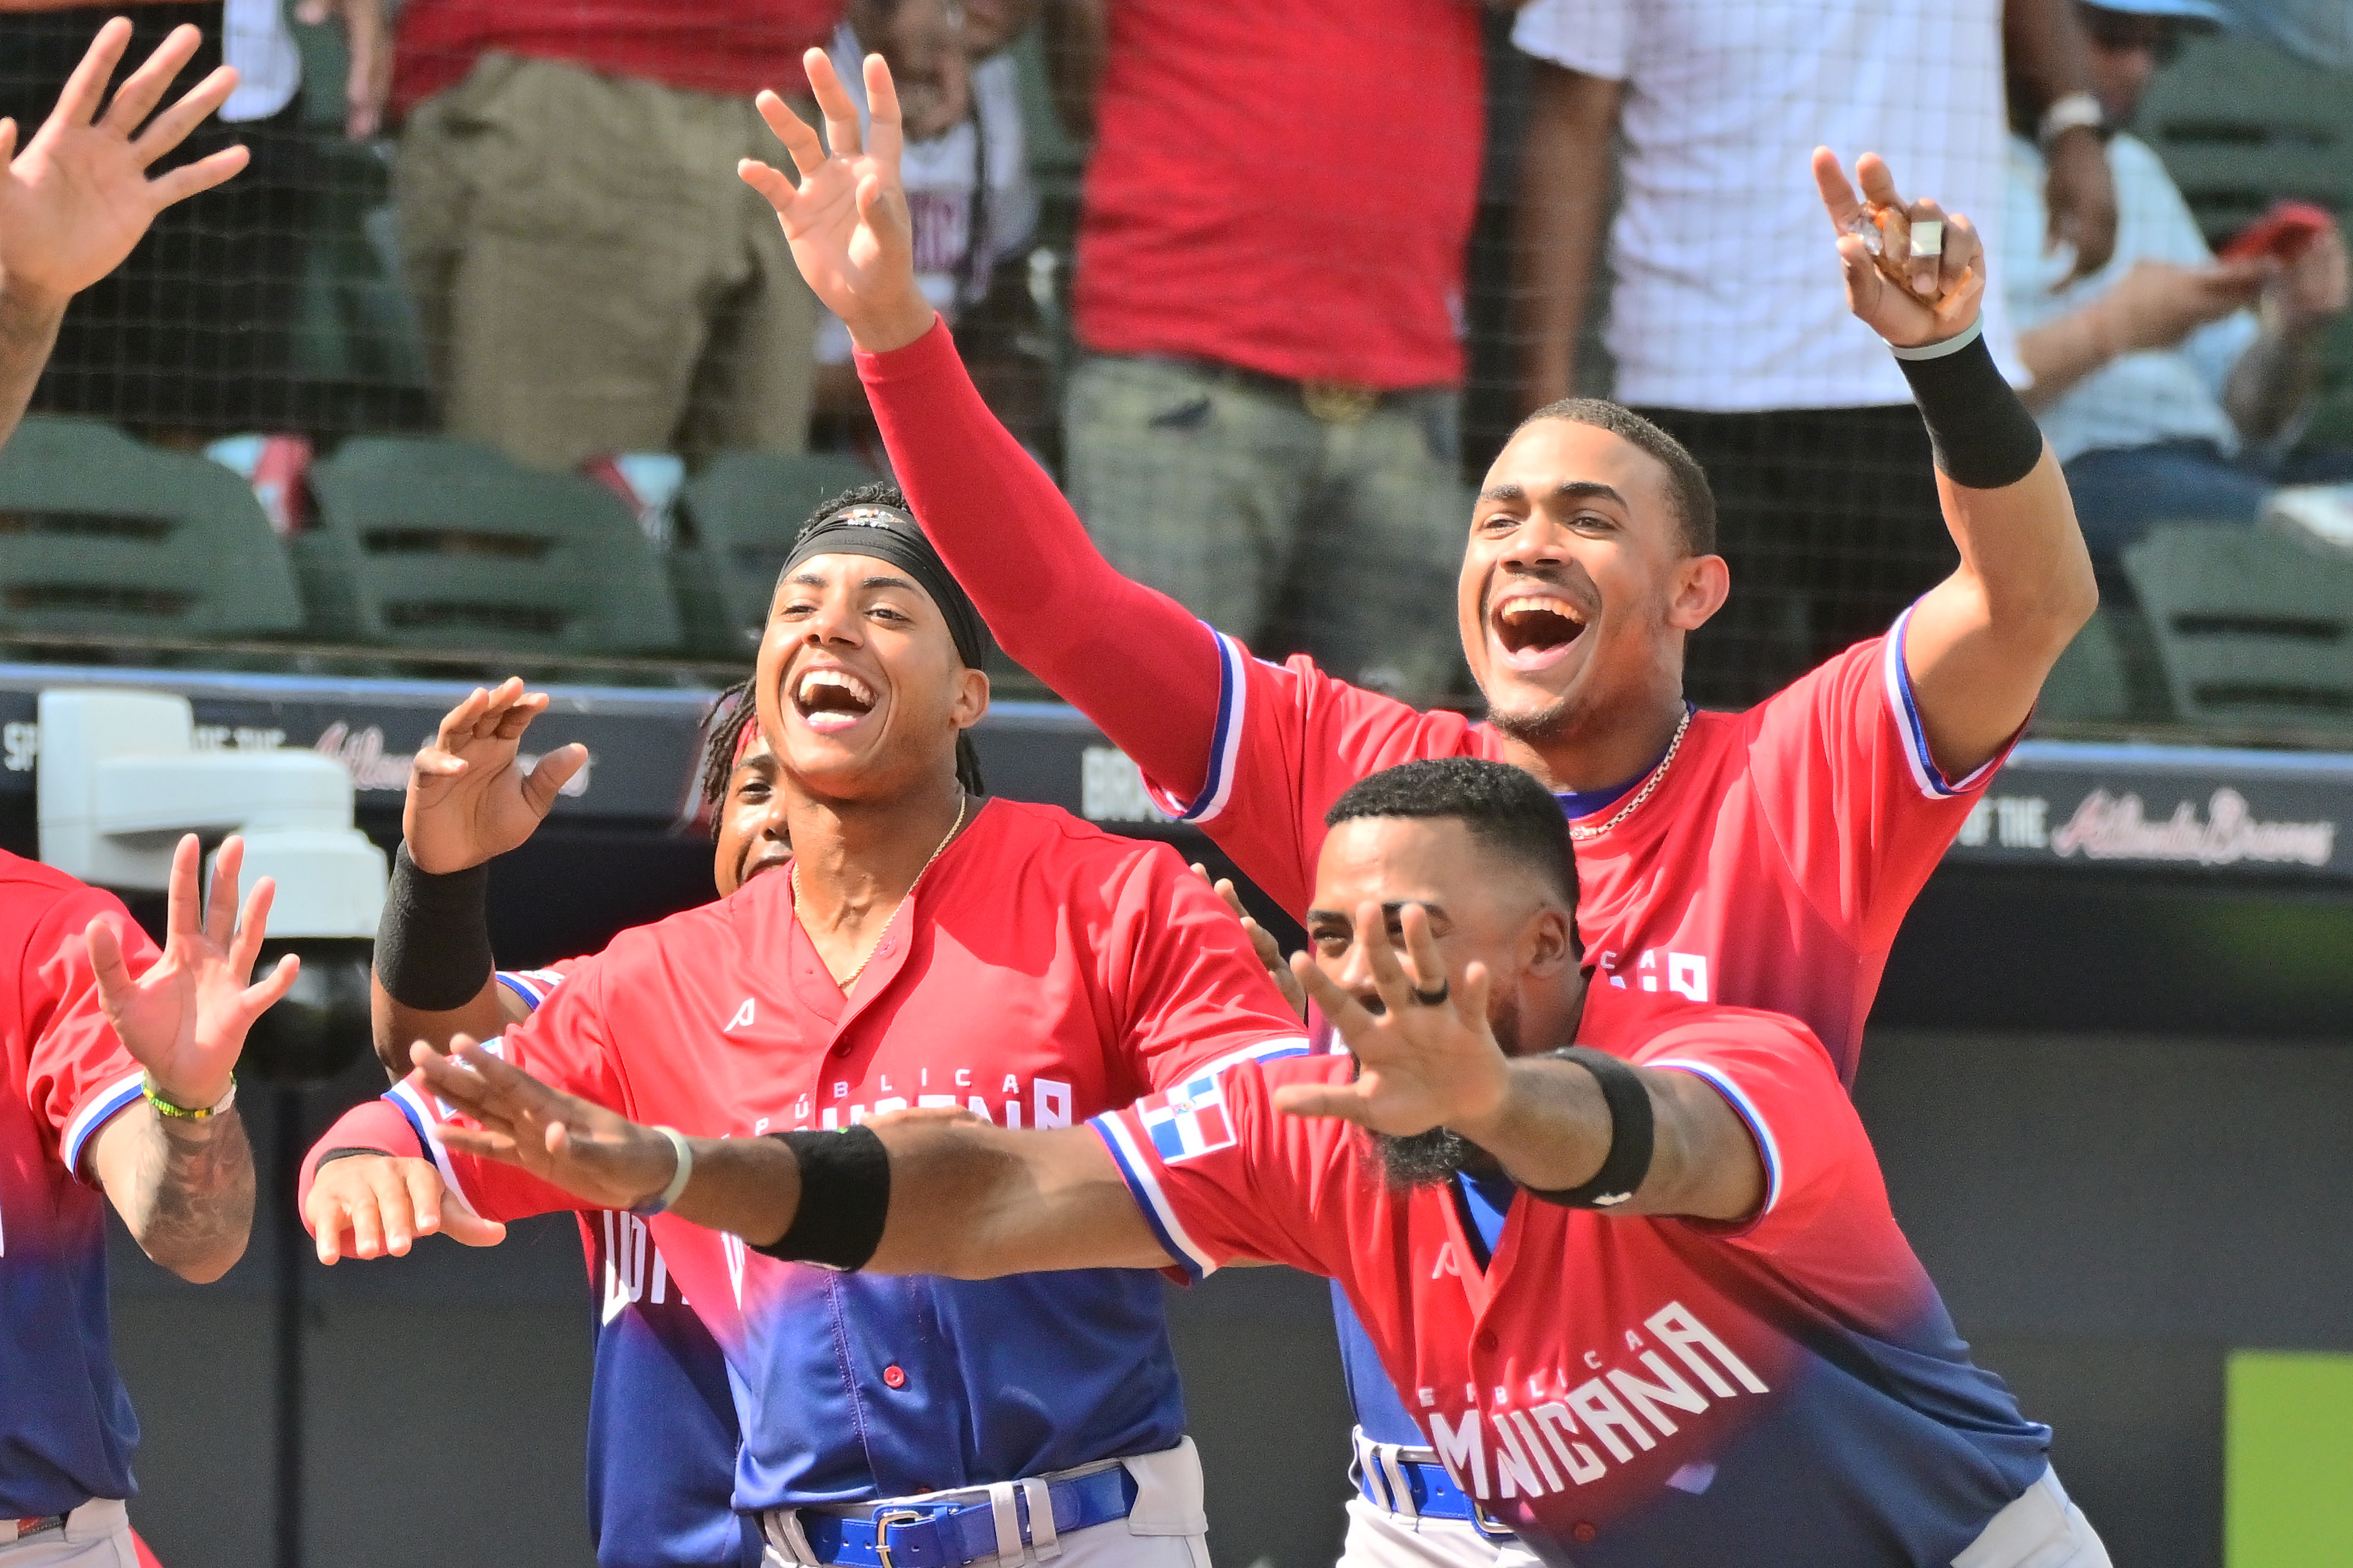 Jeremy Peña #3, Julio Rodriguez #44, and Teoscar Hernandez #37 react after Jeremy Celedonio #29 of the Dominican Republic hit a two-run home run in the sixth inning against the Atlanta Braves during an exhibition game at CoolToday Park on March 08, 2023 in North Port, Florida.